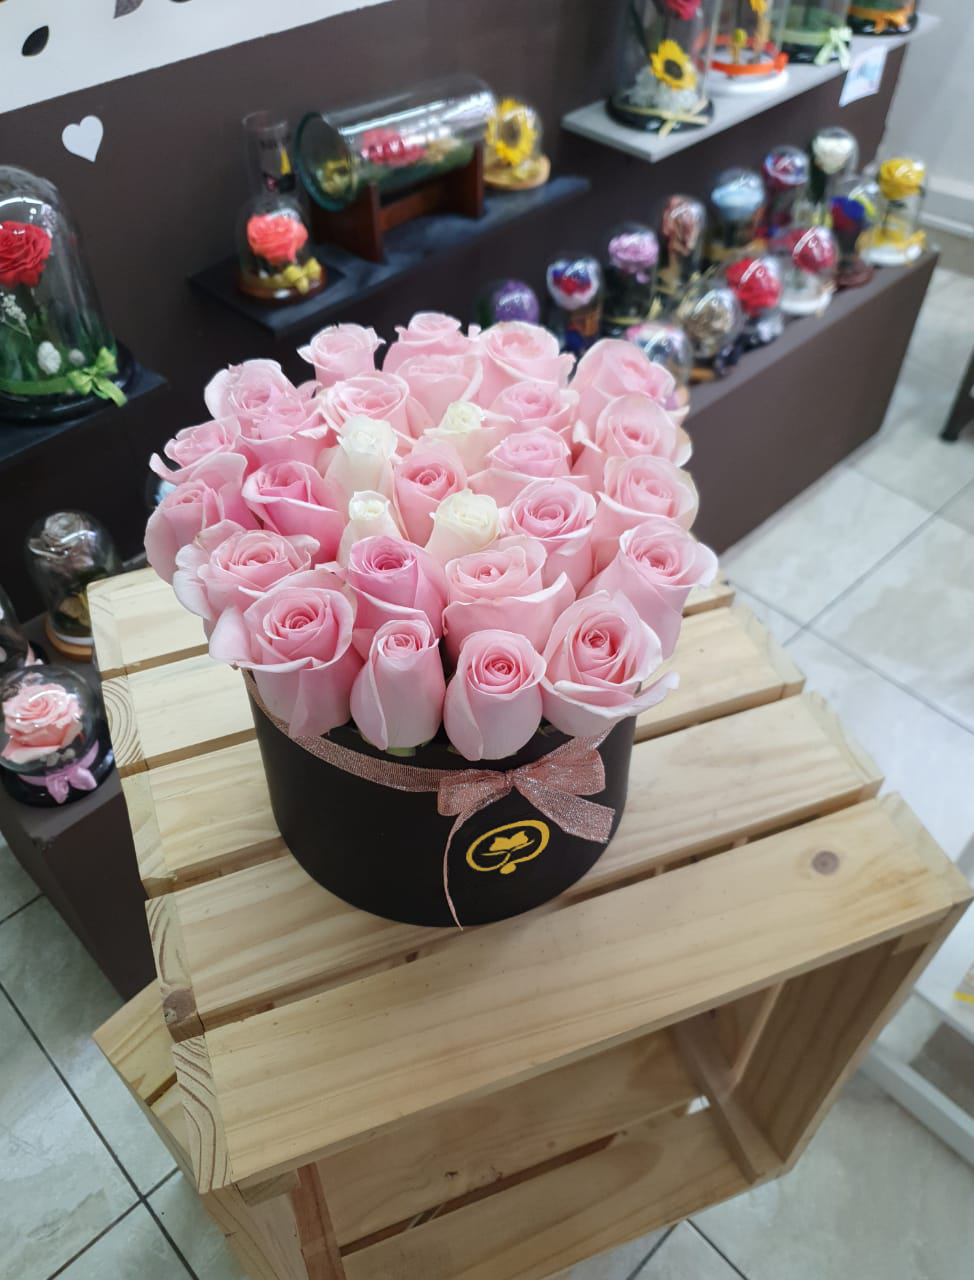 Two Dozen Roses in a Round Box - Light Pink